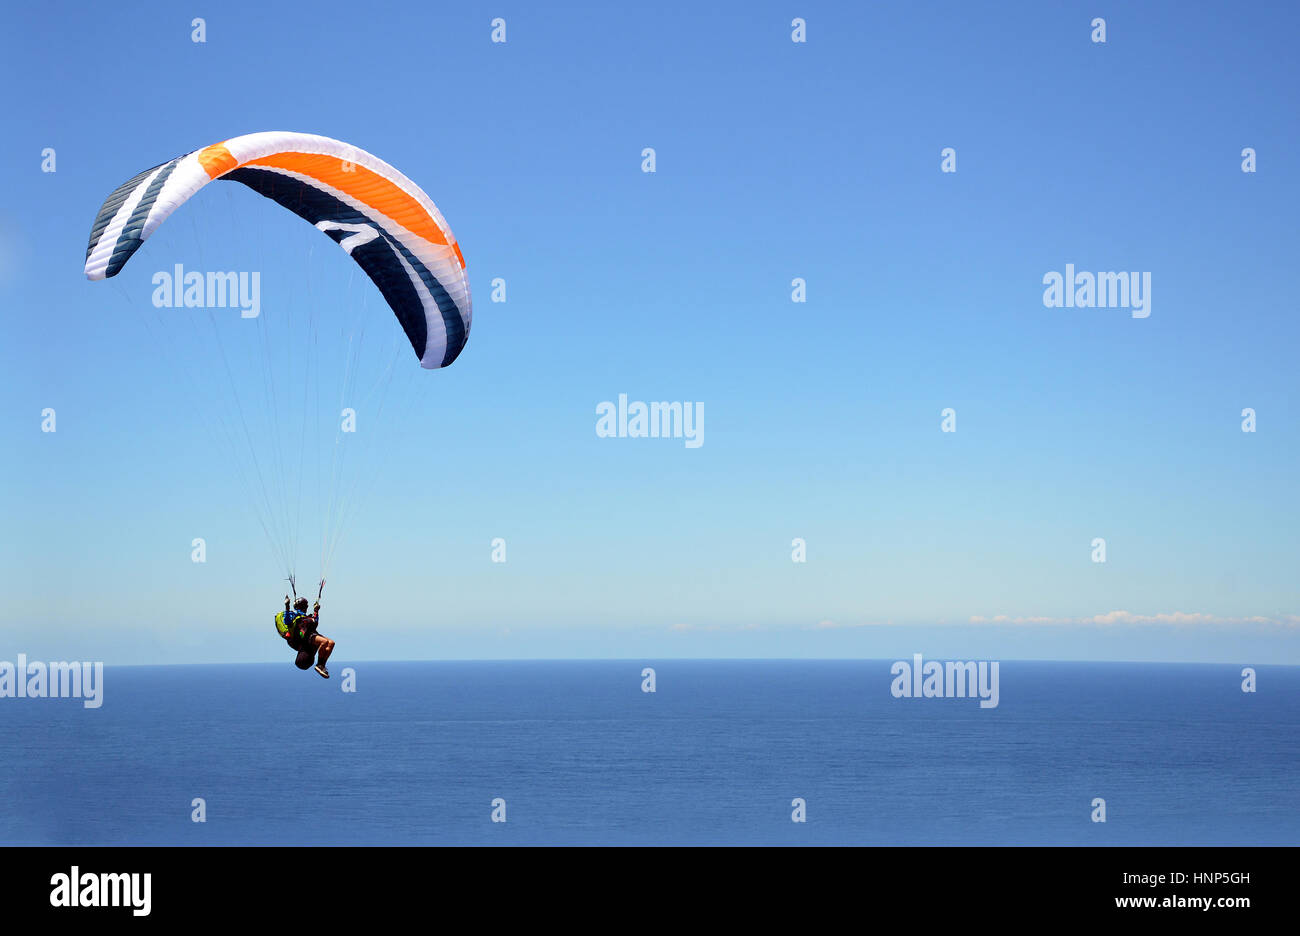 Extreme sport paragliding over the ocean through clear blue sky. Copy space for text. Stanwell Tops, New South Wales, Australia Stock Photo